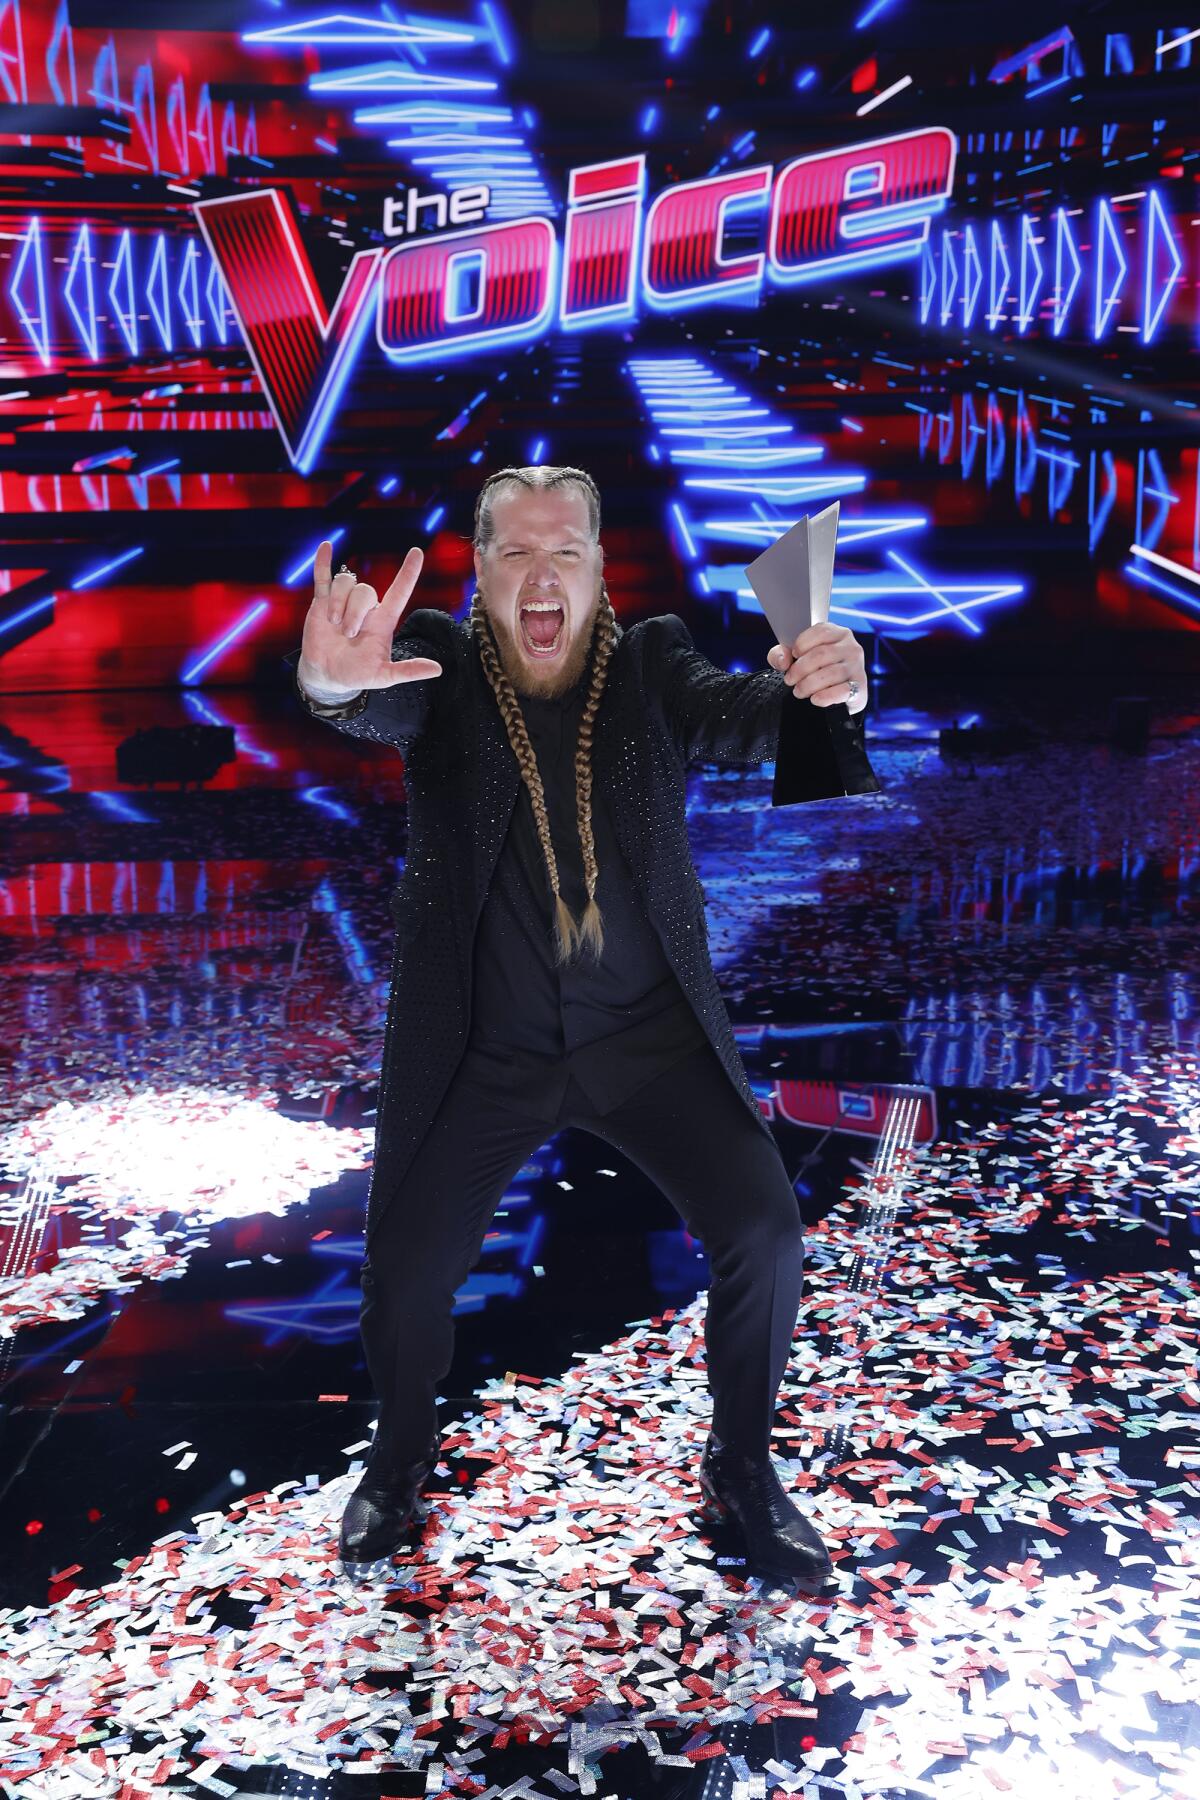 A man with long, blond braids in a black suit holding out a rock sign and a metal trophy standing over confetti